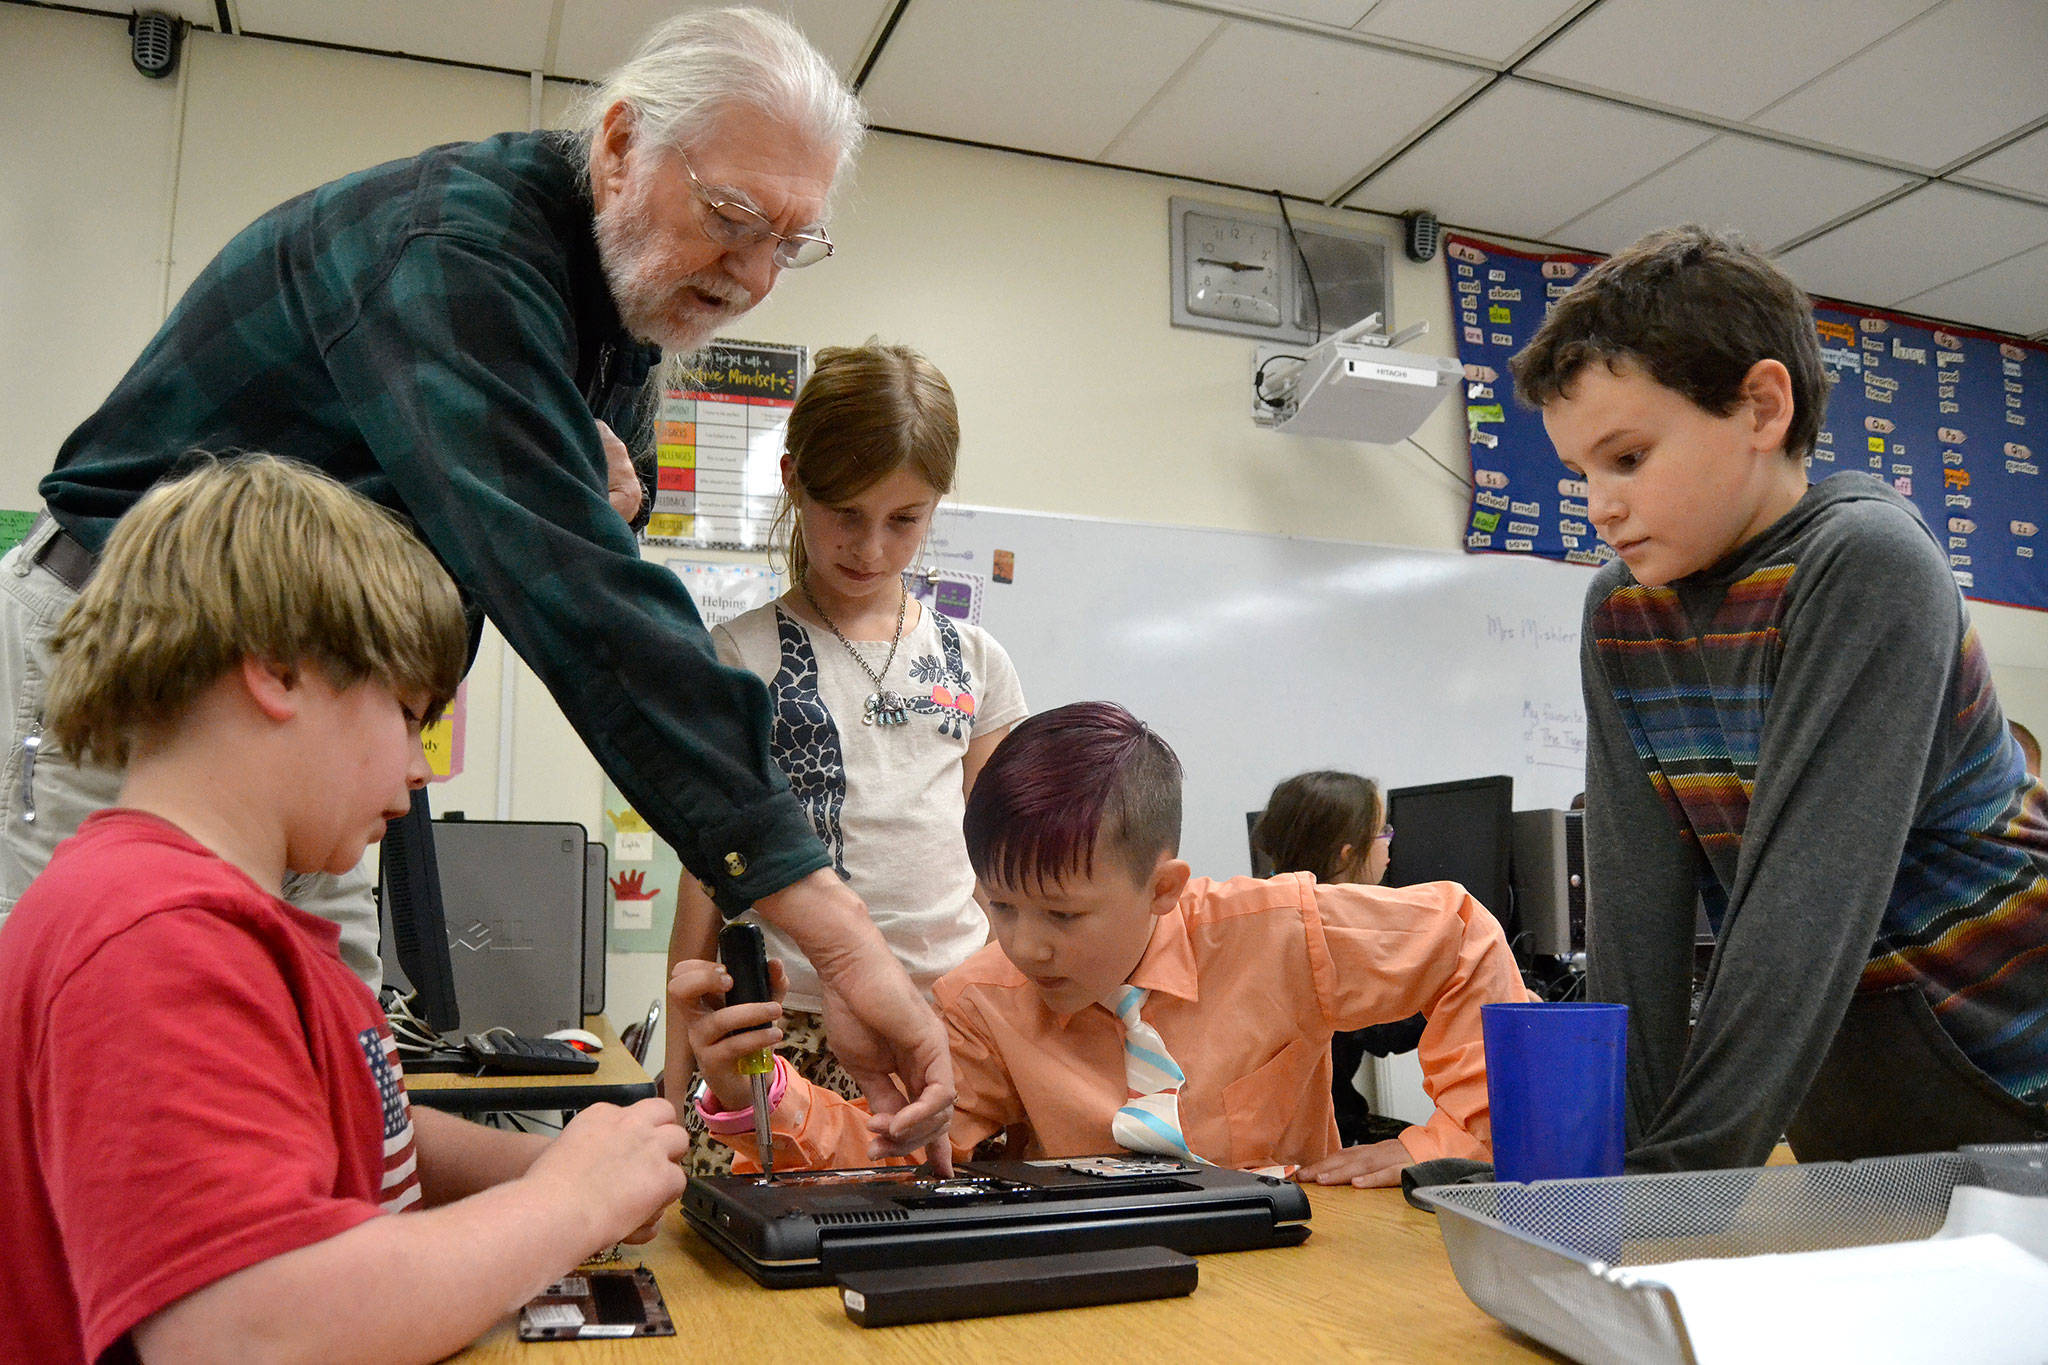 Jim Hurley with the Sequim PC Users Group shows Roosevelt Elementary students, from left, Zephyr Thompson, Maddie Walton, Aiden Johnson, and Andre Campbell the inner-workings of a laptop during the school’s Computer Club on Nov. 8. Sequim Gazette photos by Matthew Nash